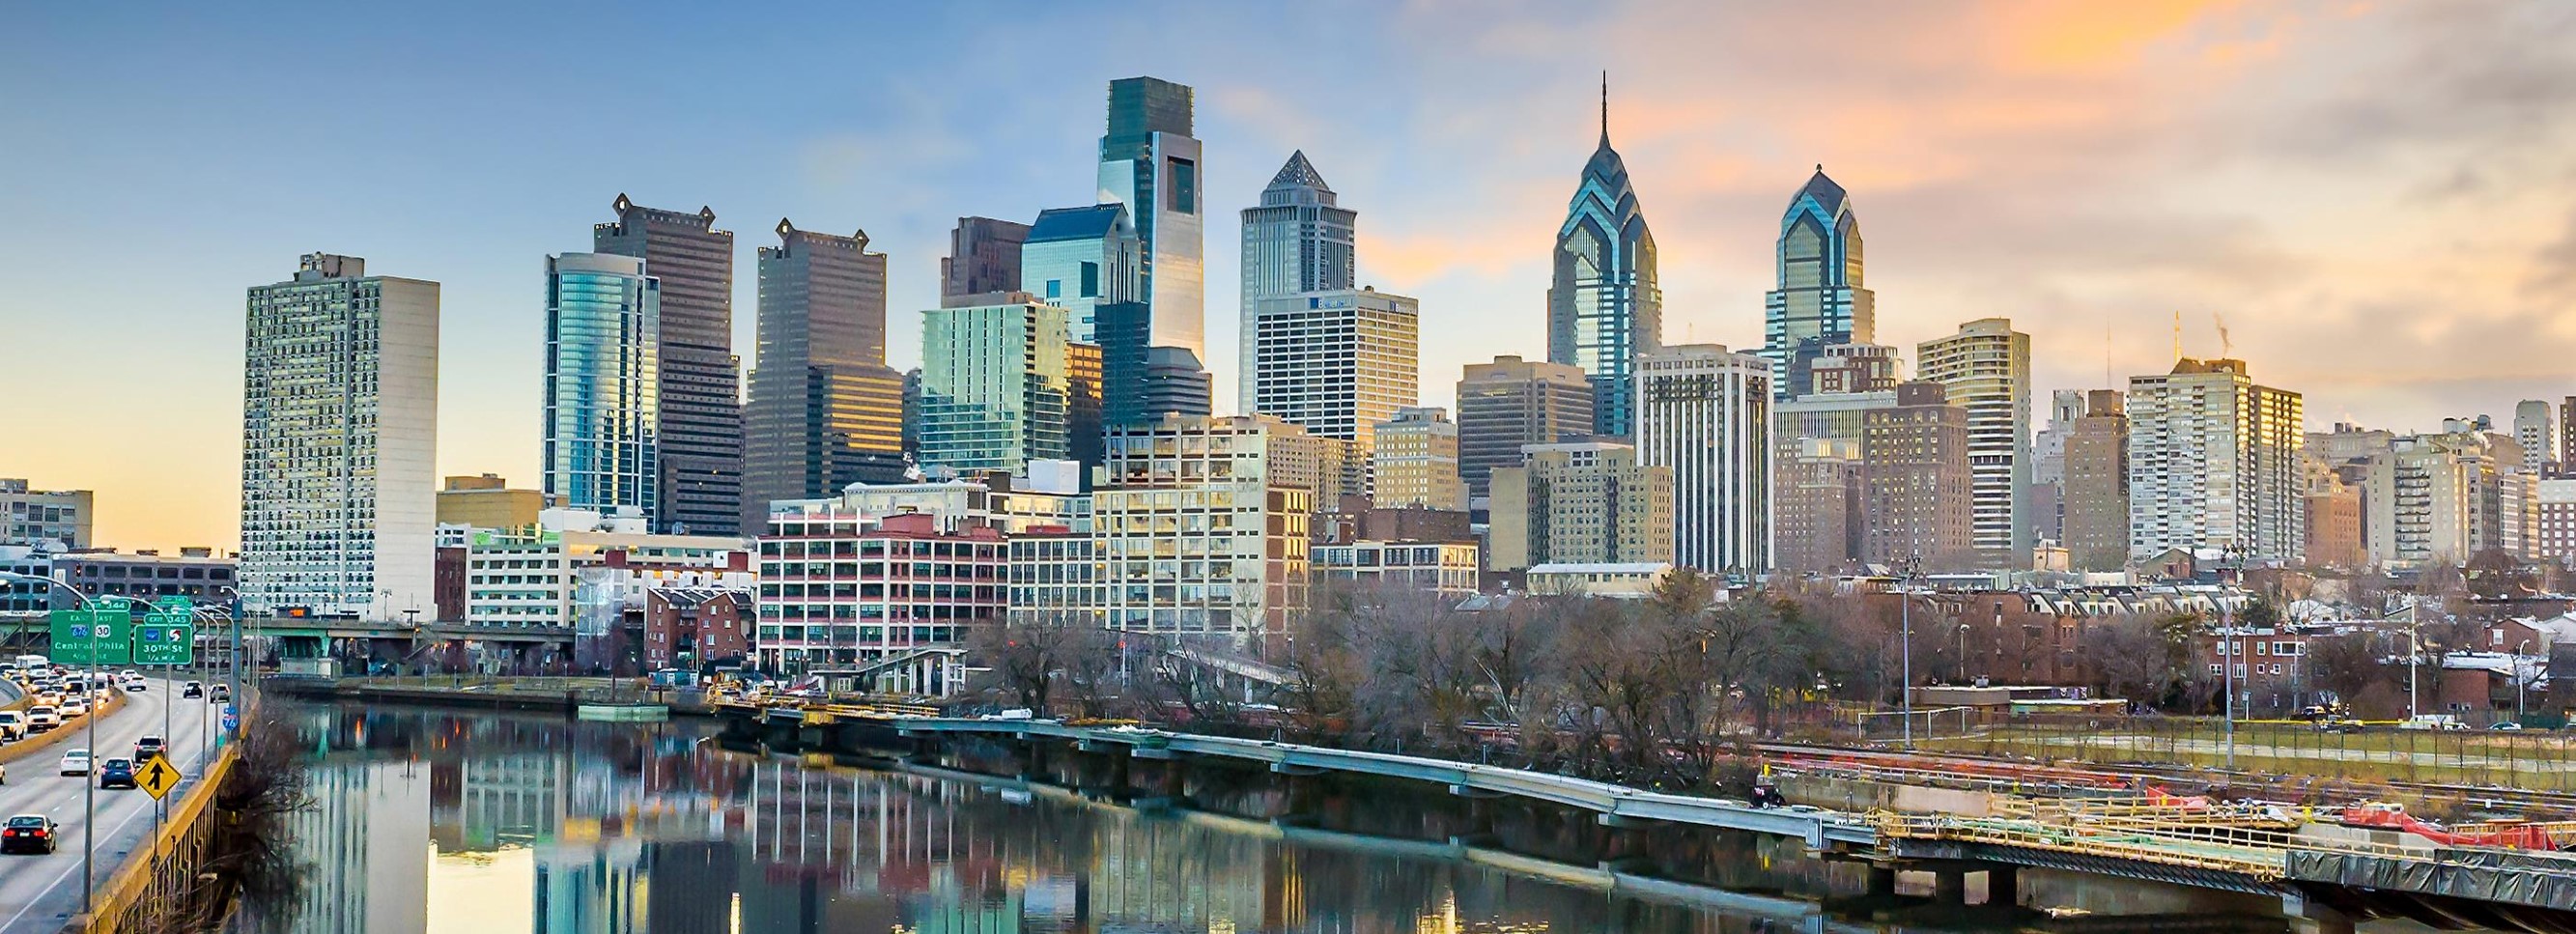 Picture of the Philadelphia Skyline with a sunrise backdrop